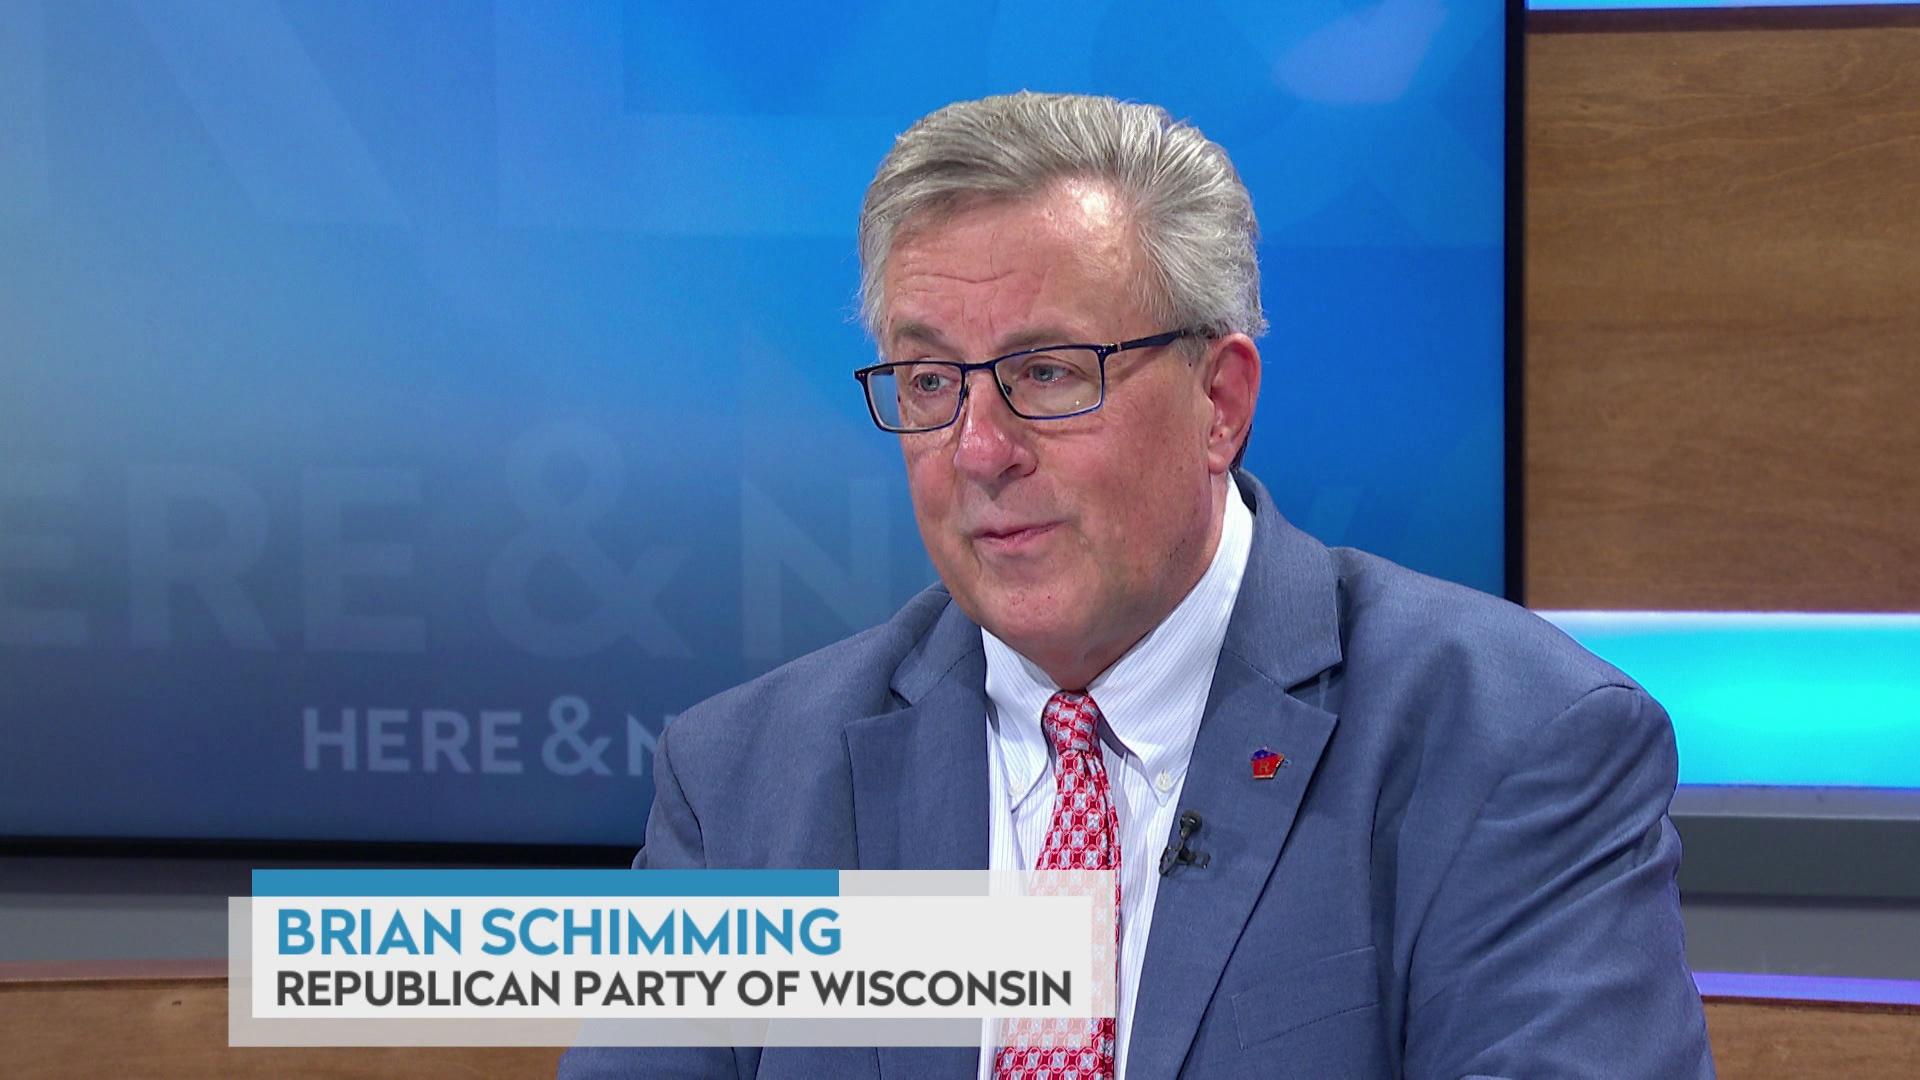 Brian Schimming on Wisconsin voters and Republicans in 2024